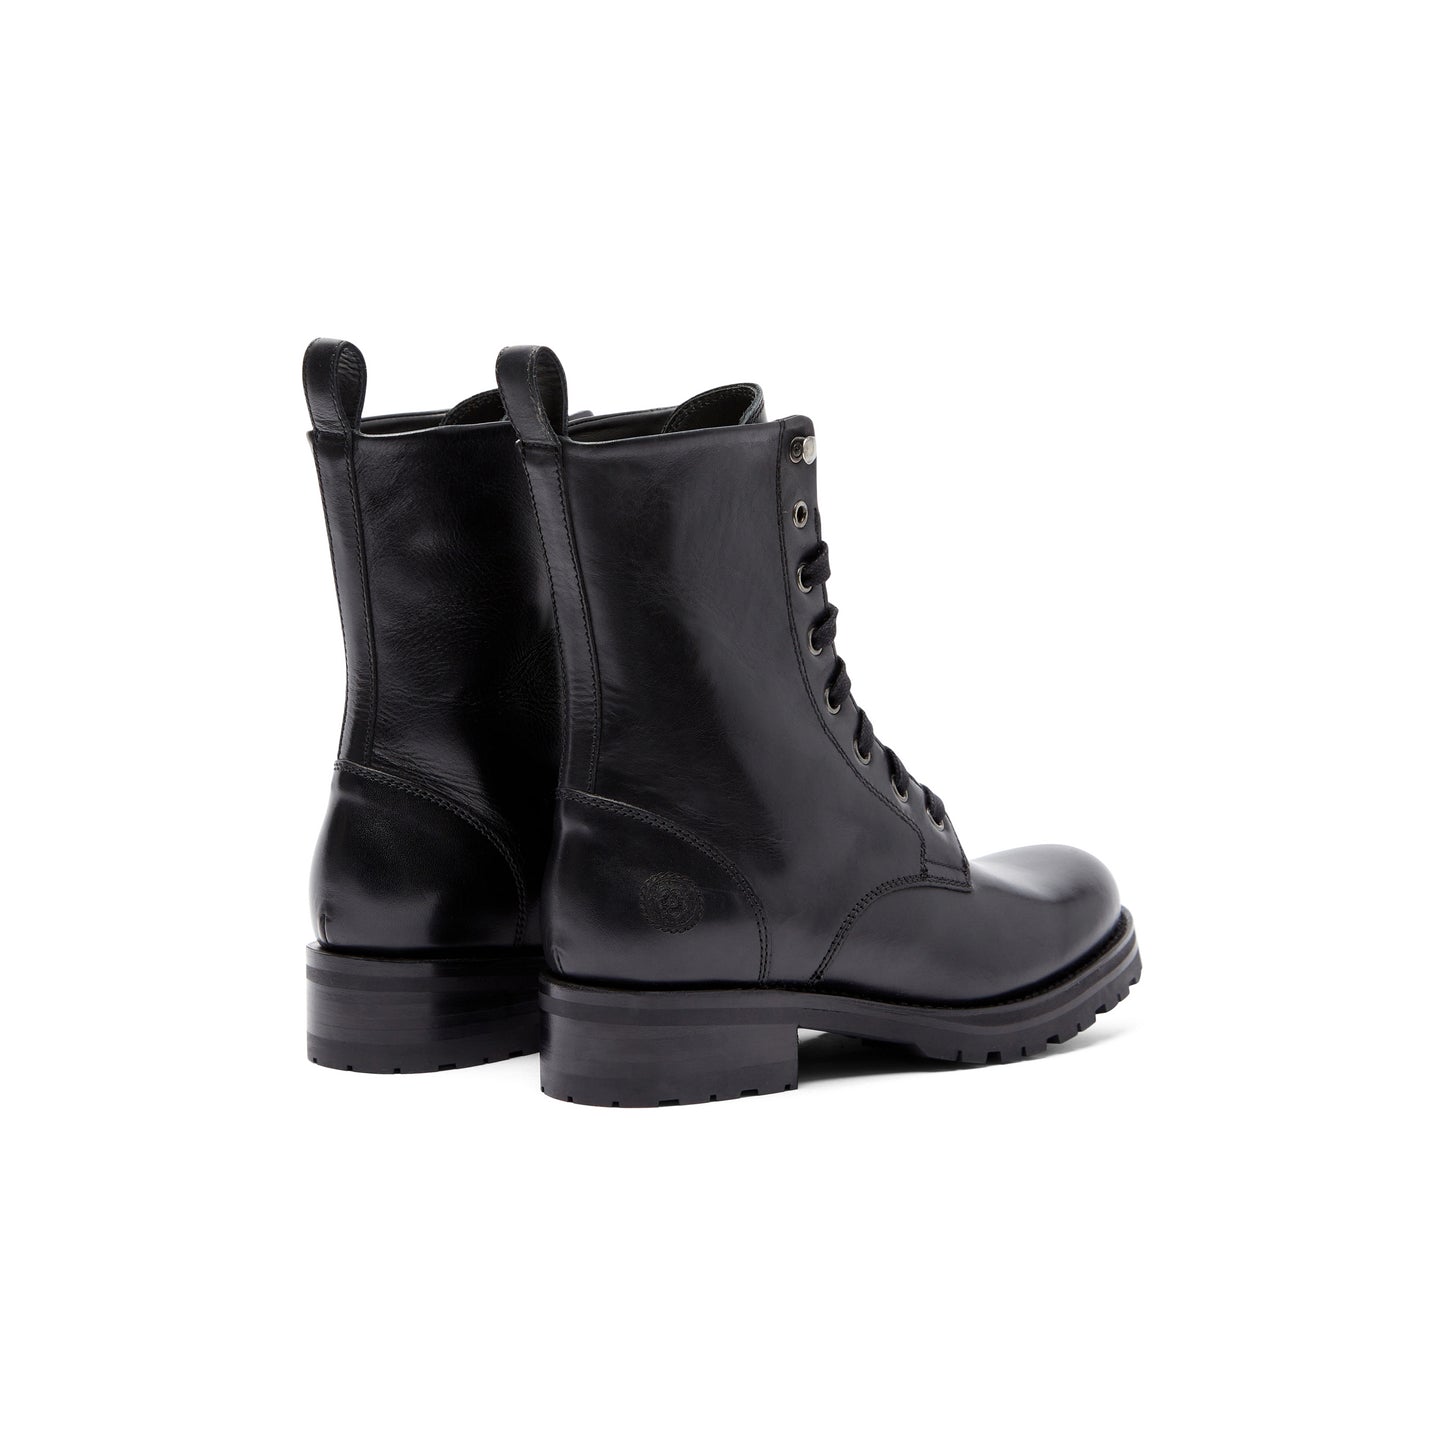 Ranch Road Boots - Poppy Combat - Black - Back Pair